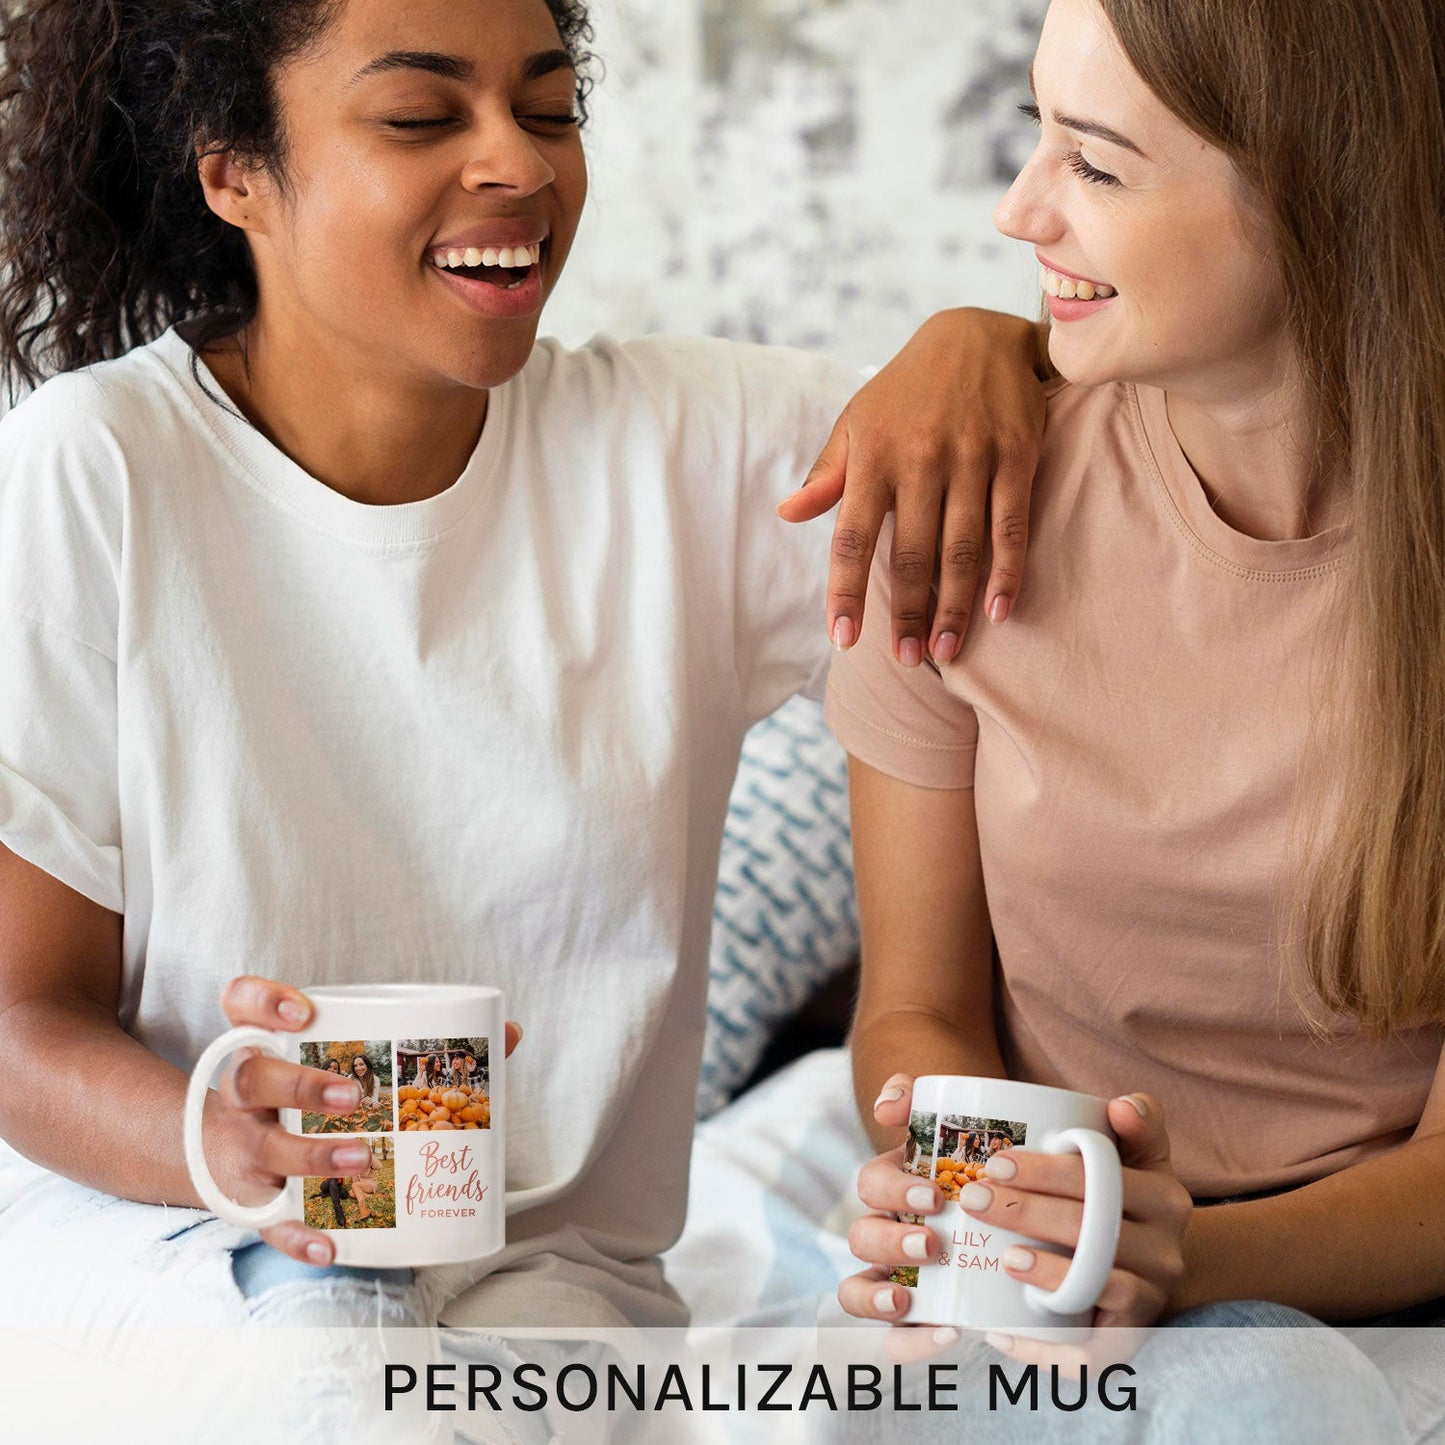 Best Friends Forever - Personalized Birthday, Galentine's Day or Christmas gift For Friends - Custom Mug - MyMindfulGifts